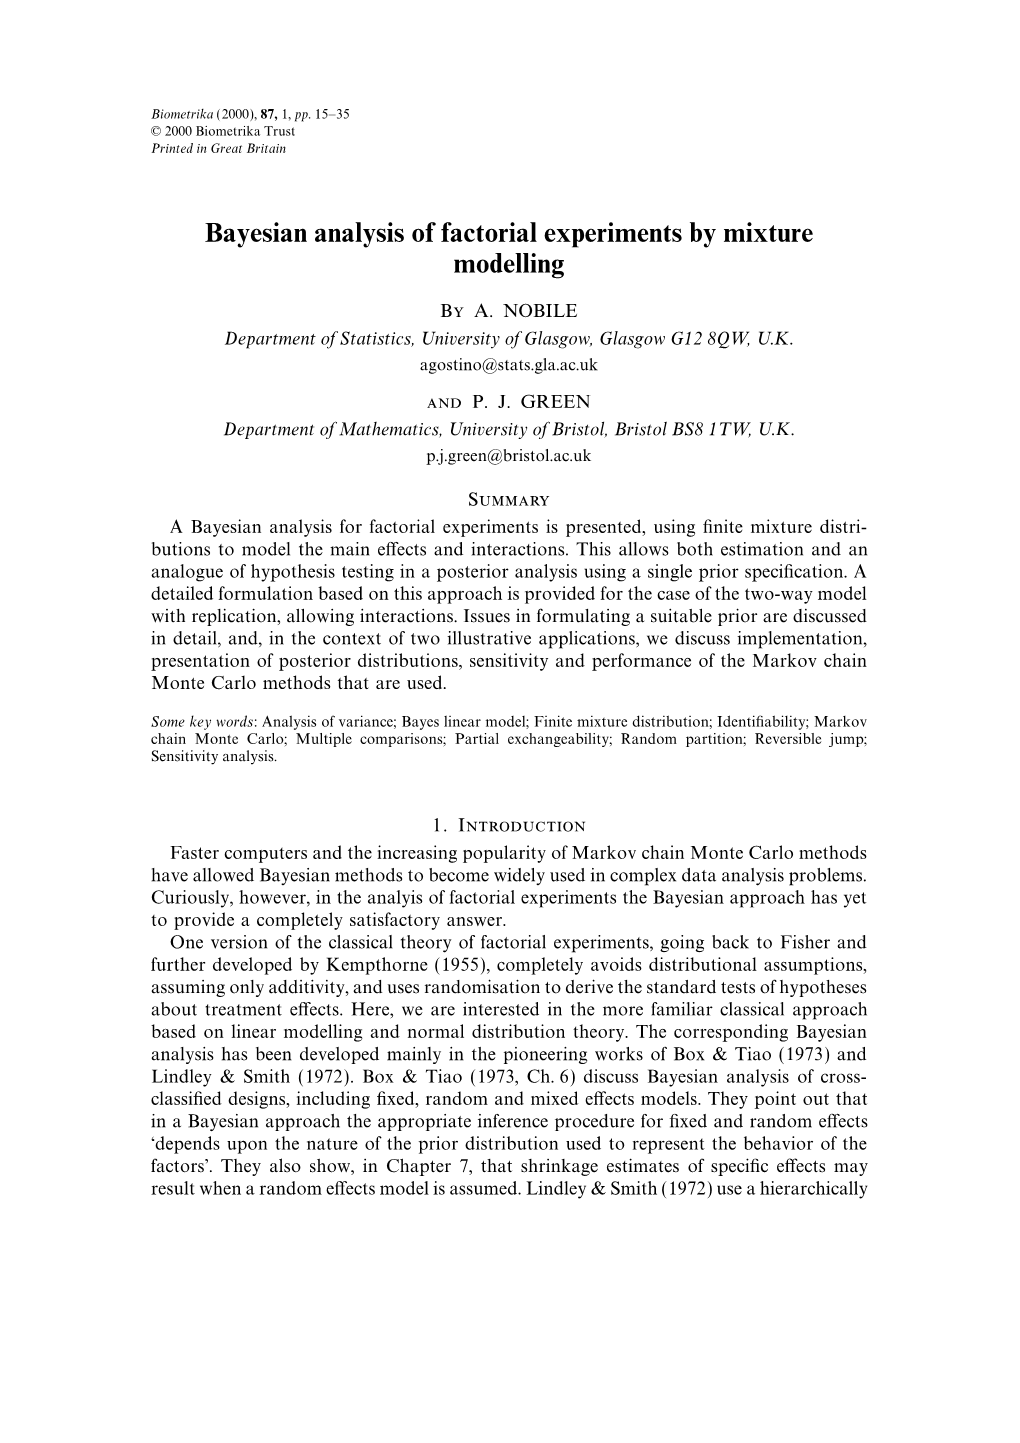 Bayesian Analysis of Factorial Experiments by Mixture Modelling